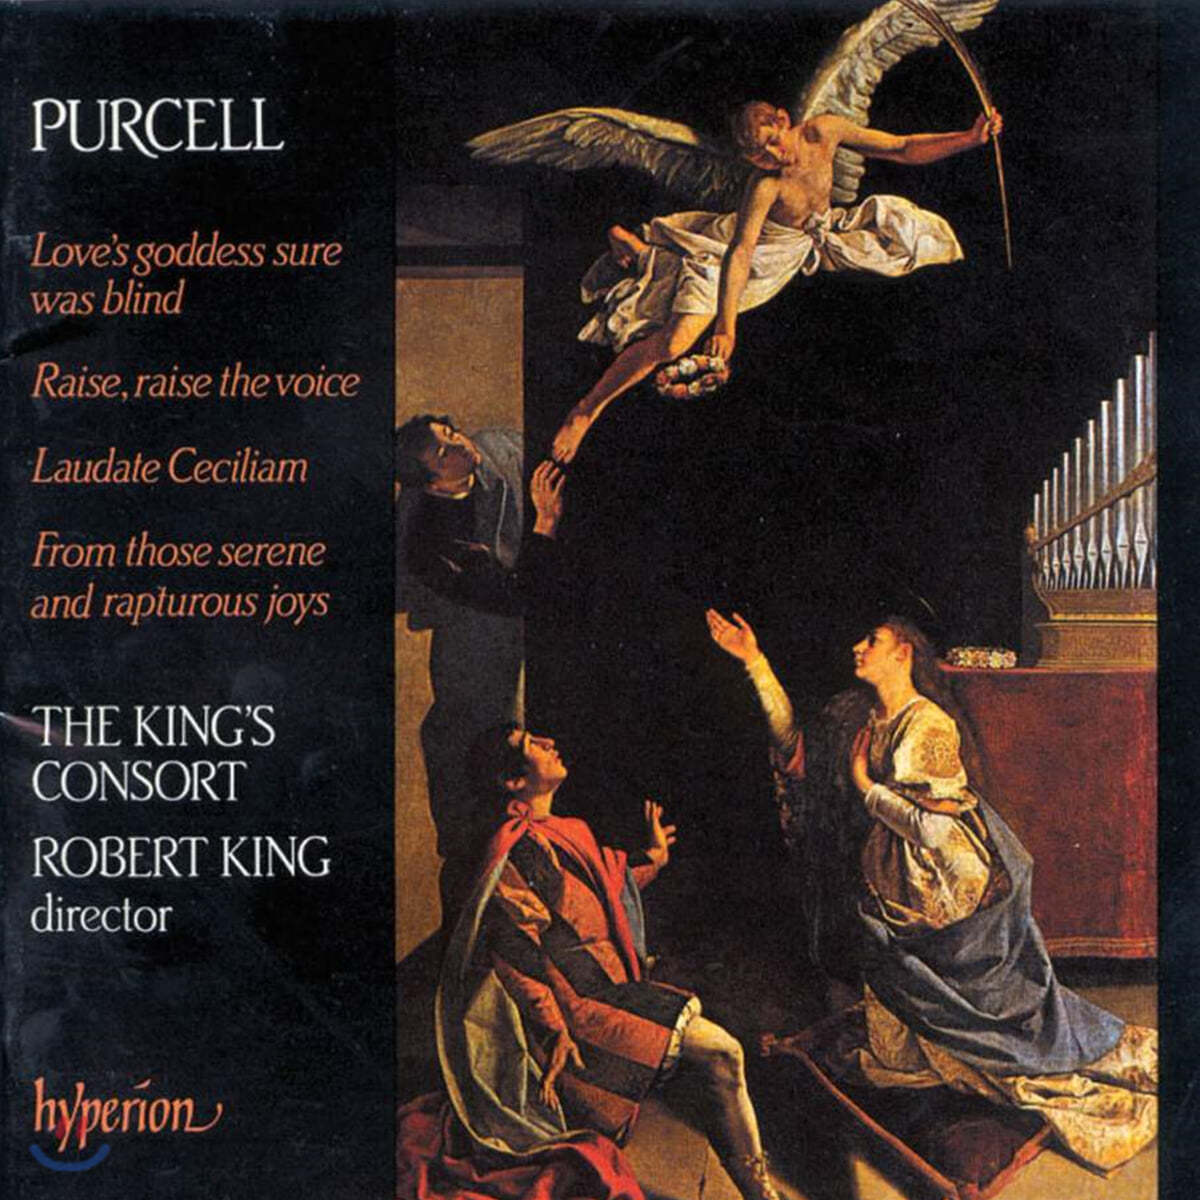 Gillian Fisher 퍼셀: 송가와 축하 음악 6권 (Purcell: Complete Odes, Welcome Songs Vol. 6)